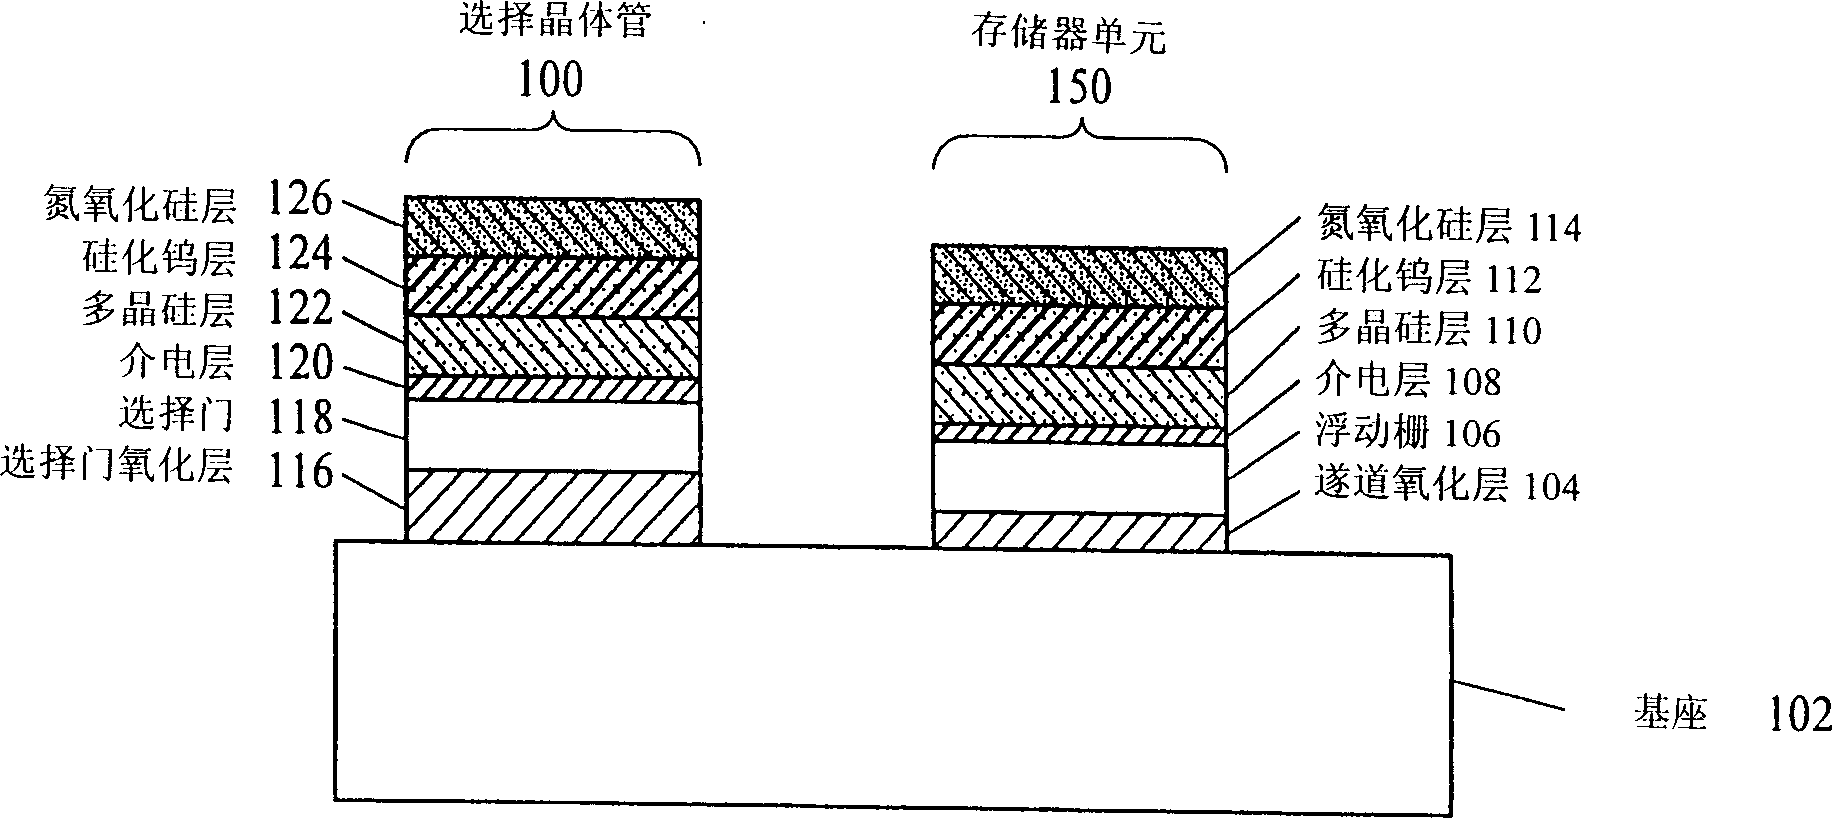 Method for providing dopant level for polysilicon for flash memory devices